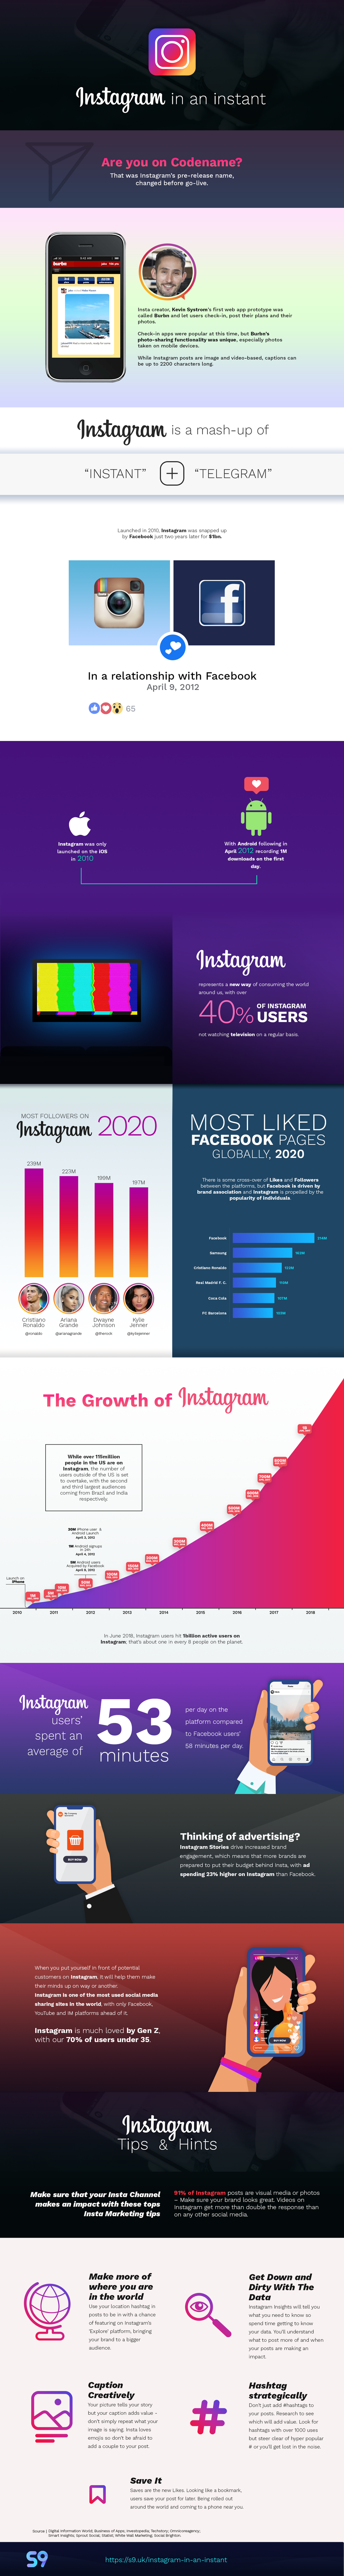 instagram in an instant infographic